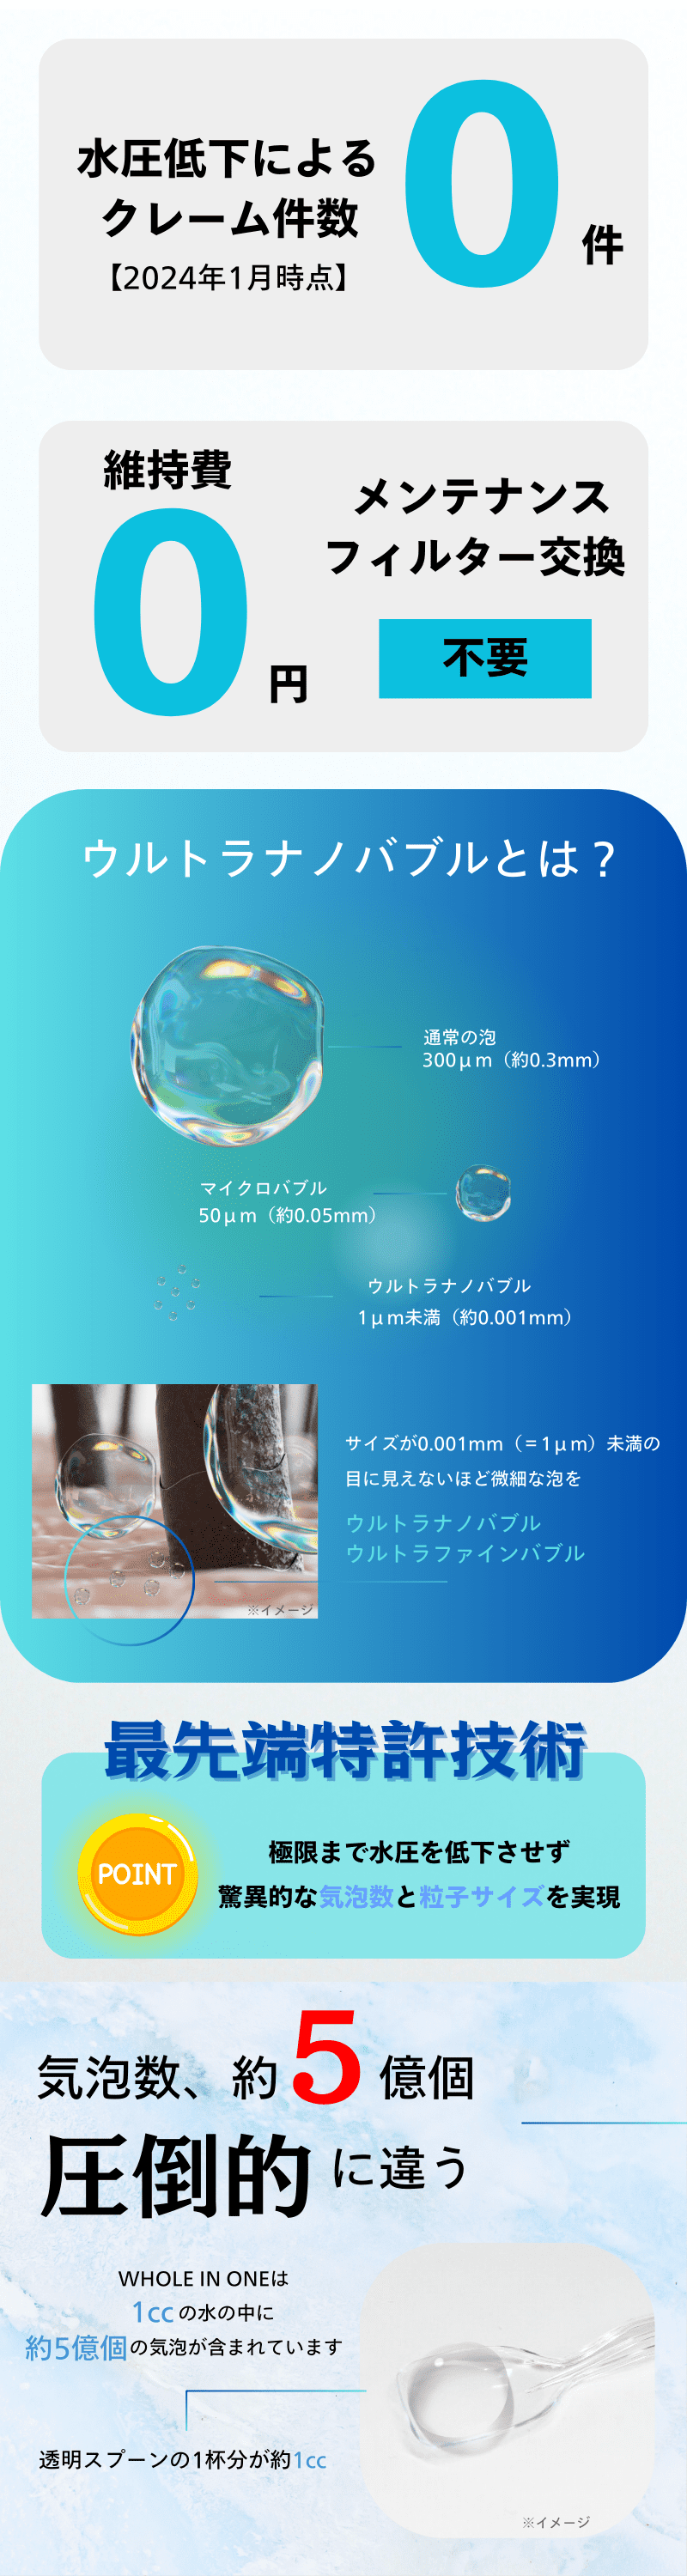 WHOLE IN ONE ”美バブル”